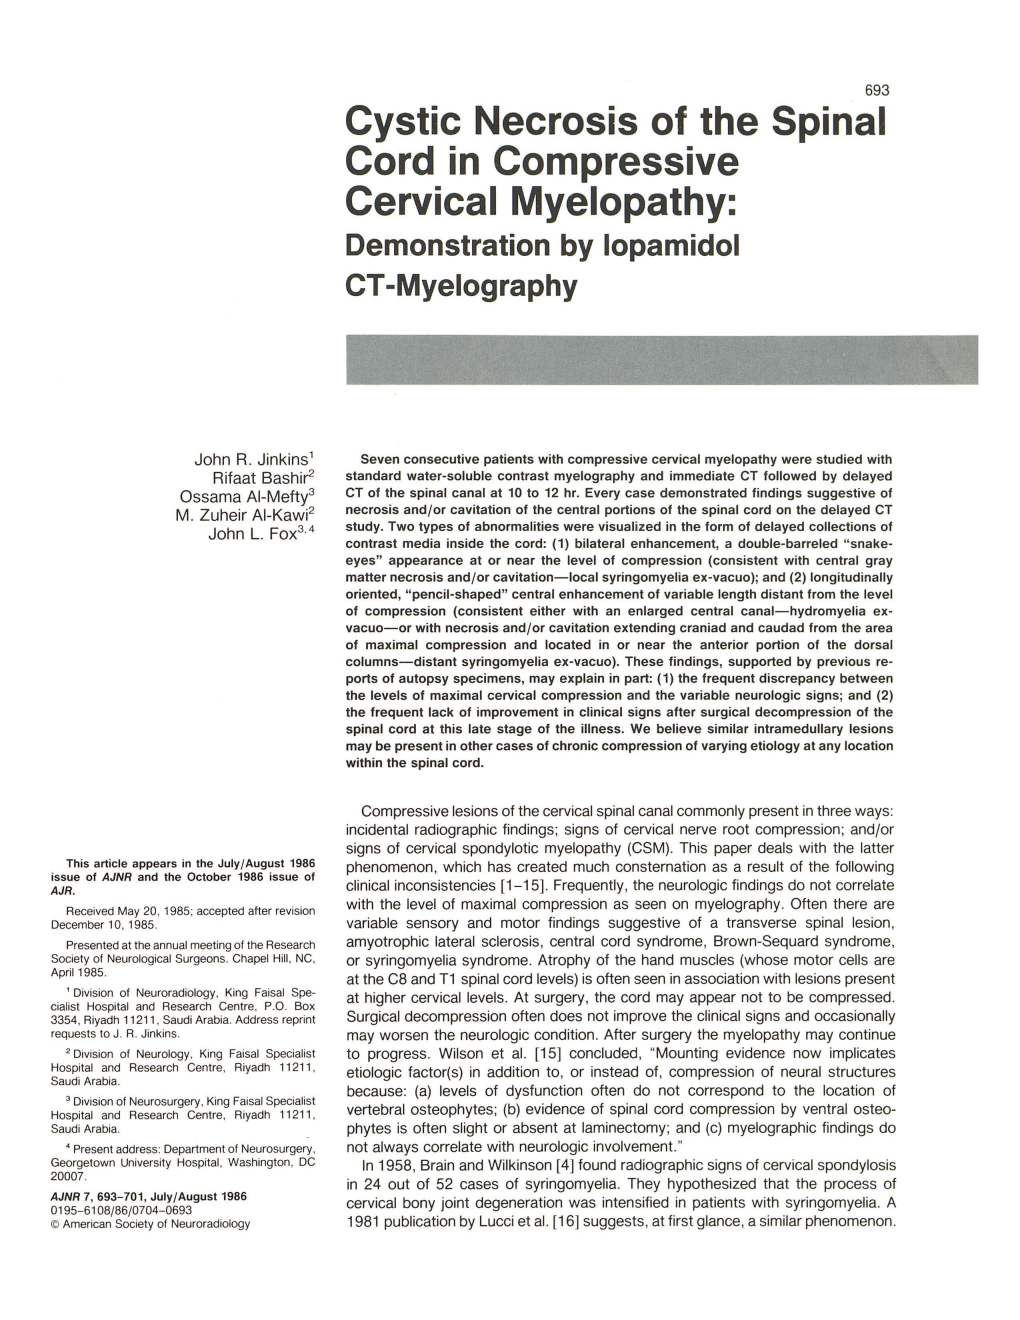 Cystic Necrosis of the Spinal Cord in Compressive Cervical Myelopathy: Demonstration by Lopamidol CT-Myelography